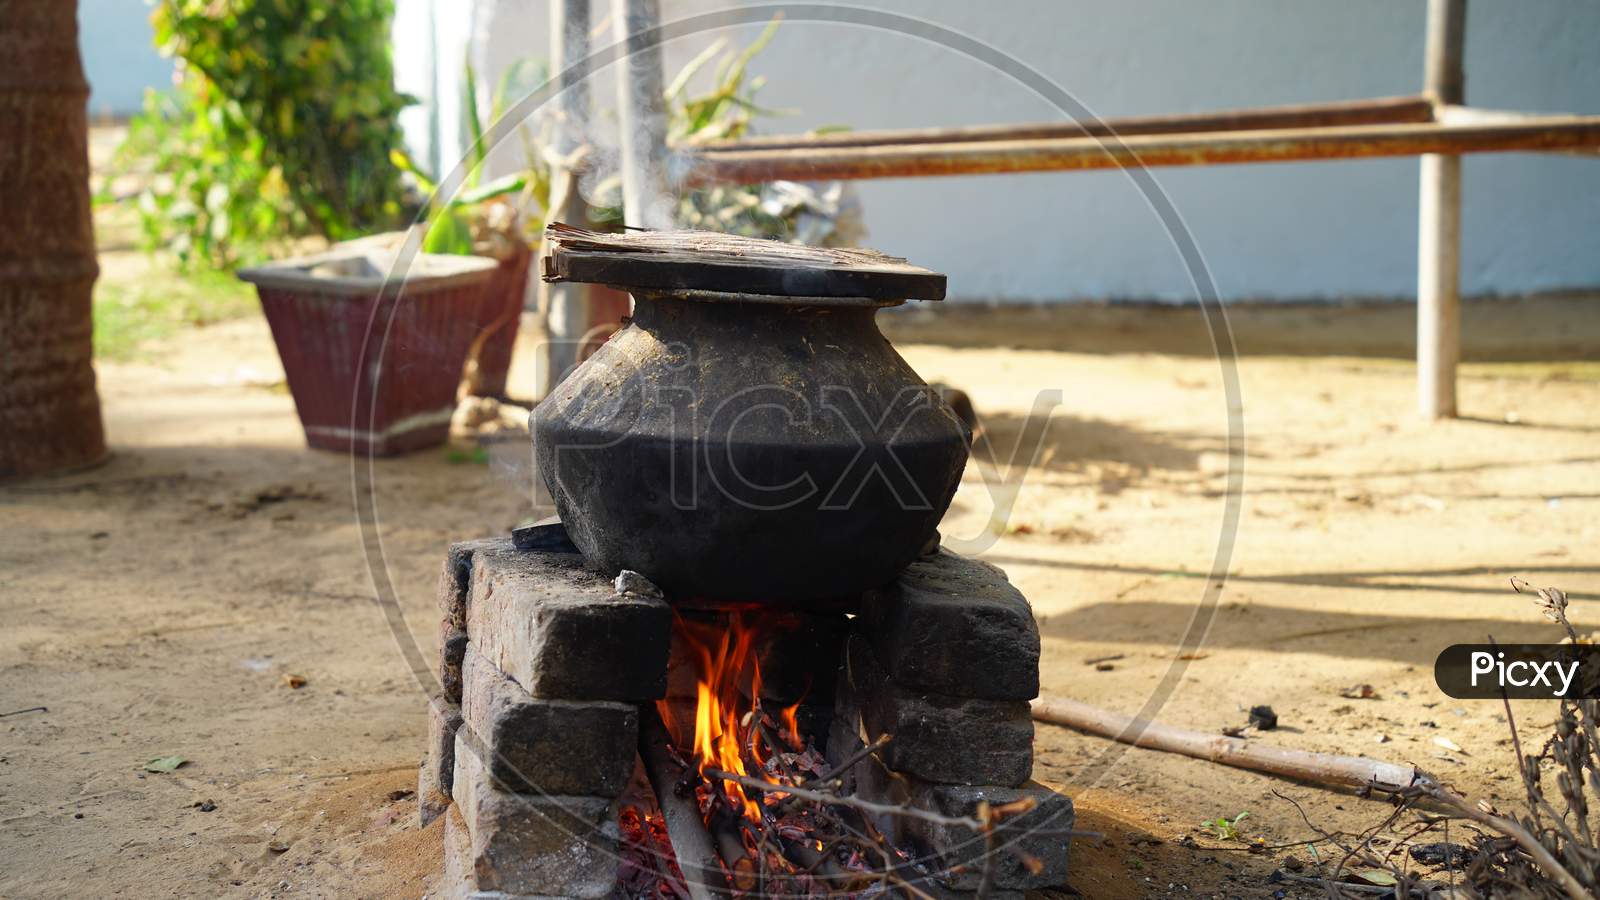 Illuminating Fire In Natural Clay Stove In Rural Village Of Rajasthan India. Pan Or Aluminum Pot On The Stove.